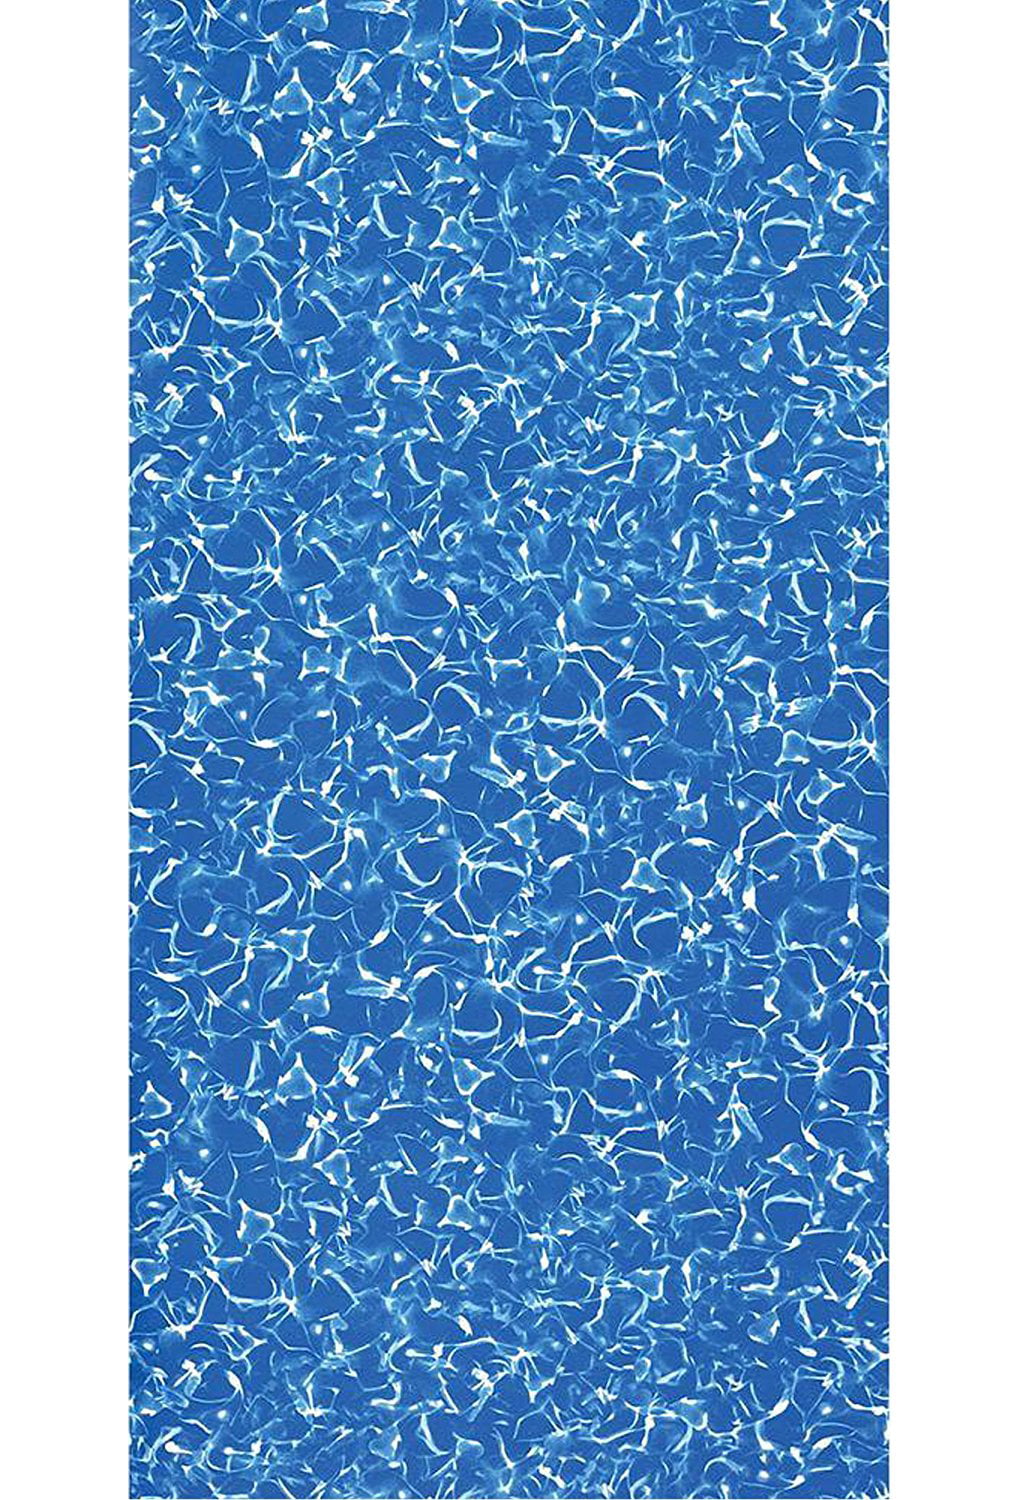 Overlap Expandable Style Designed for Above-Ground Swimming Pools with Deep Middles 25 Gauge Virgin Vinyl SmartLine Sunlight 18-Foot Round Liner 60-Inch Wall Height